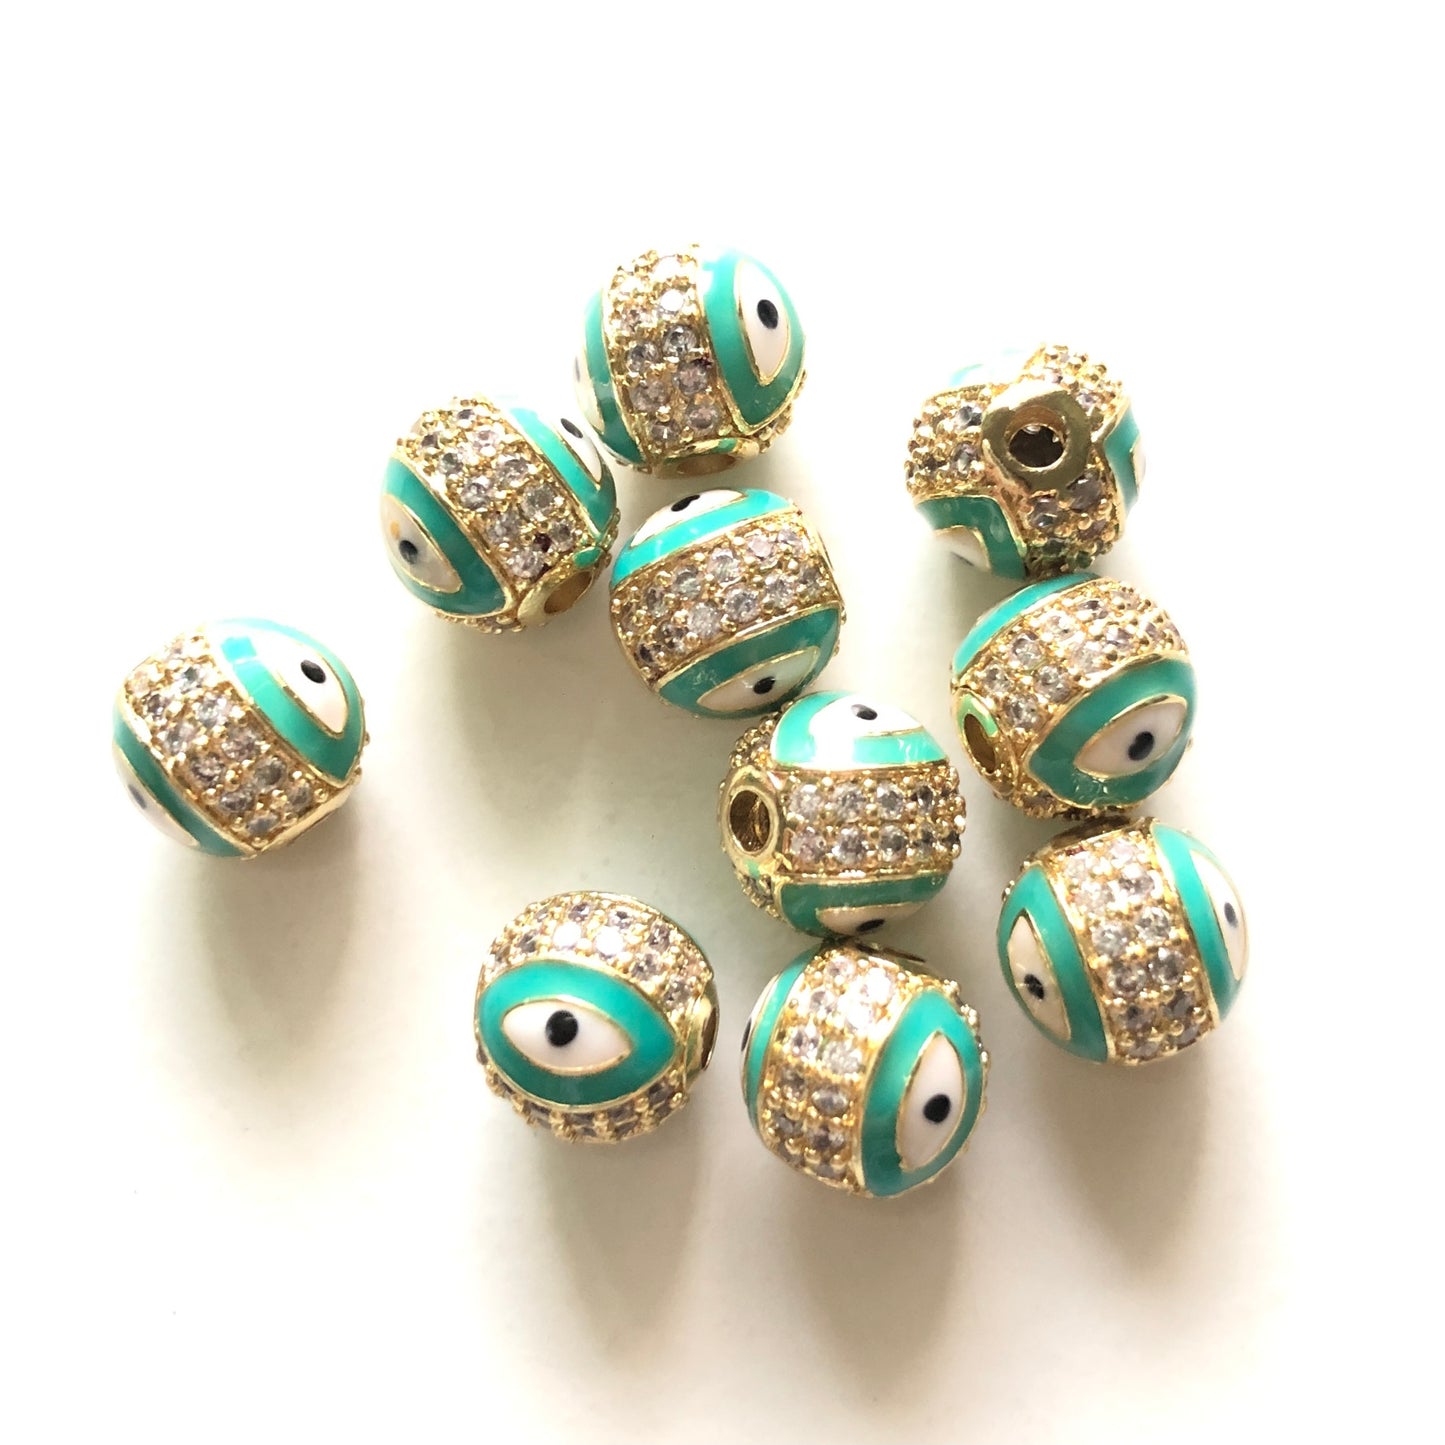 10pcs/lot 10mm CZ Paved Gold Evil Eye Ball Spacers Beads Green CZ Paved Spacers 10mm Beads Ball Beads New Spacers Arrivals Charms Beads Beyond